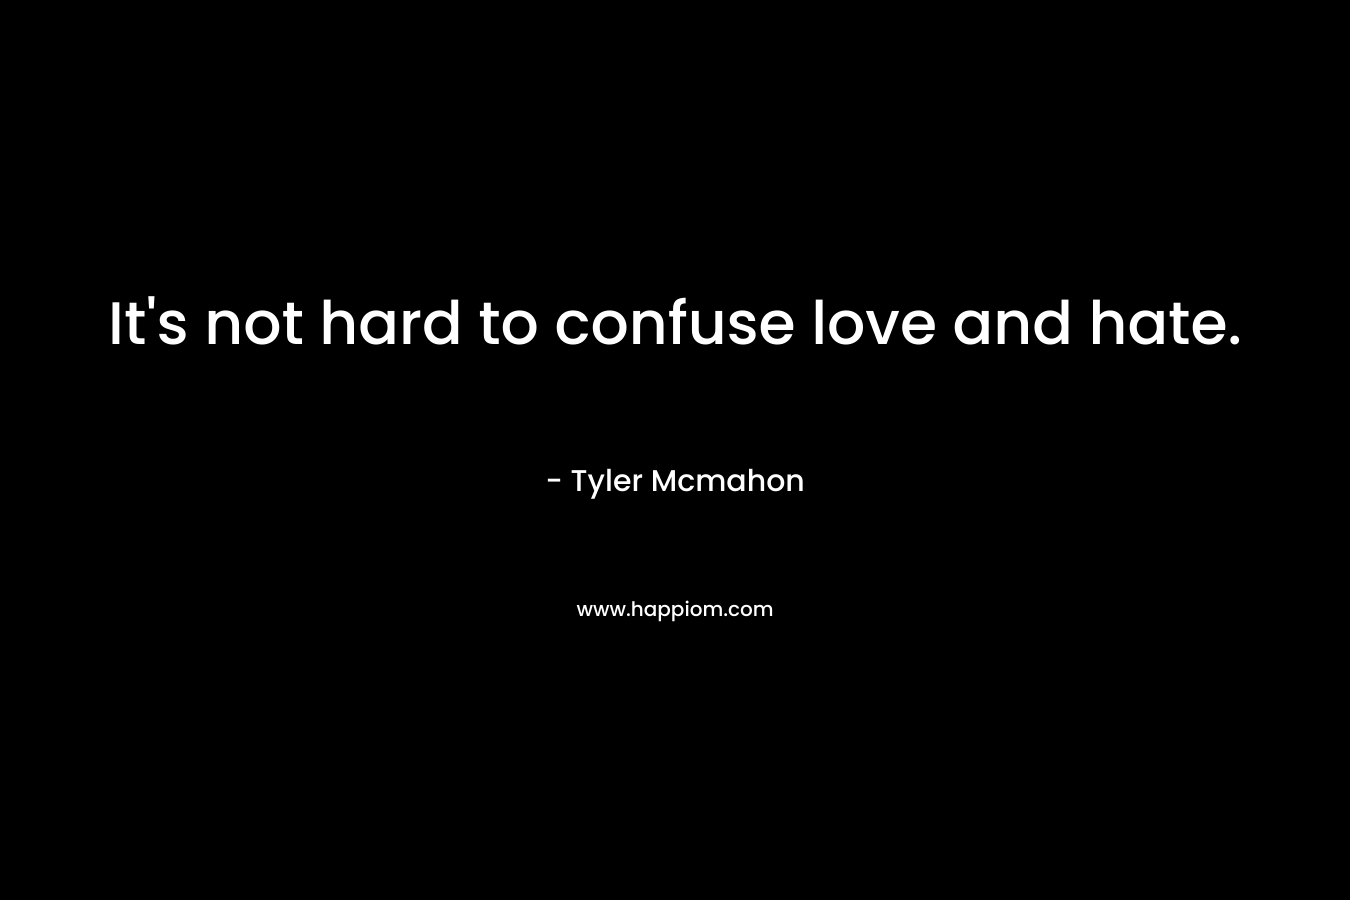 It’s not hard to confuse love and hate. – Tyler Mcmahon